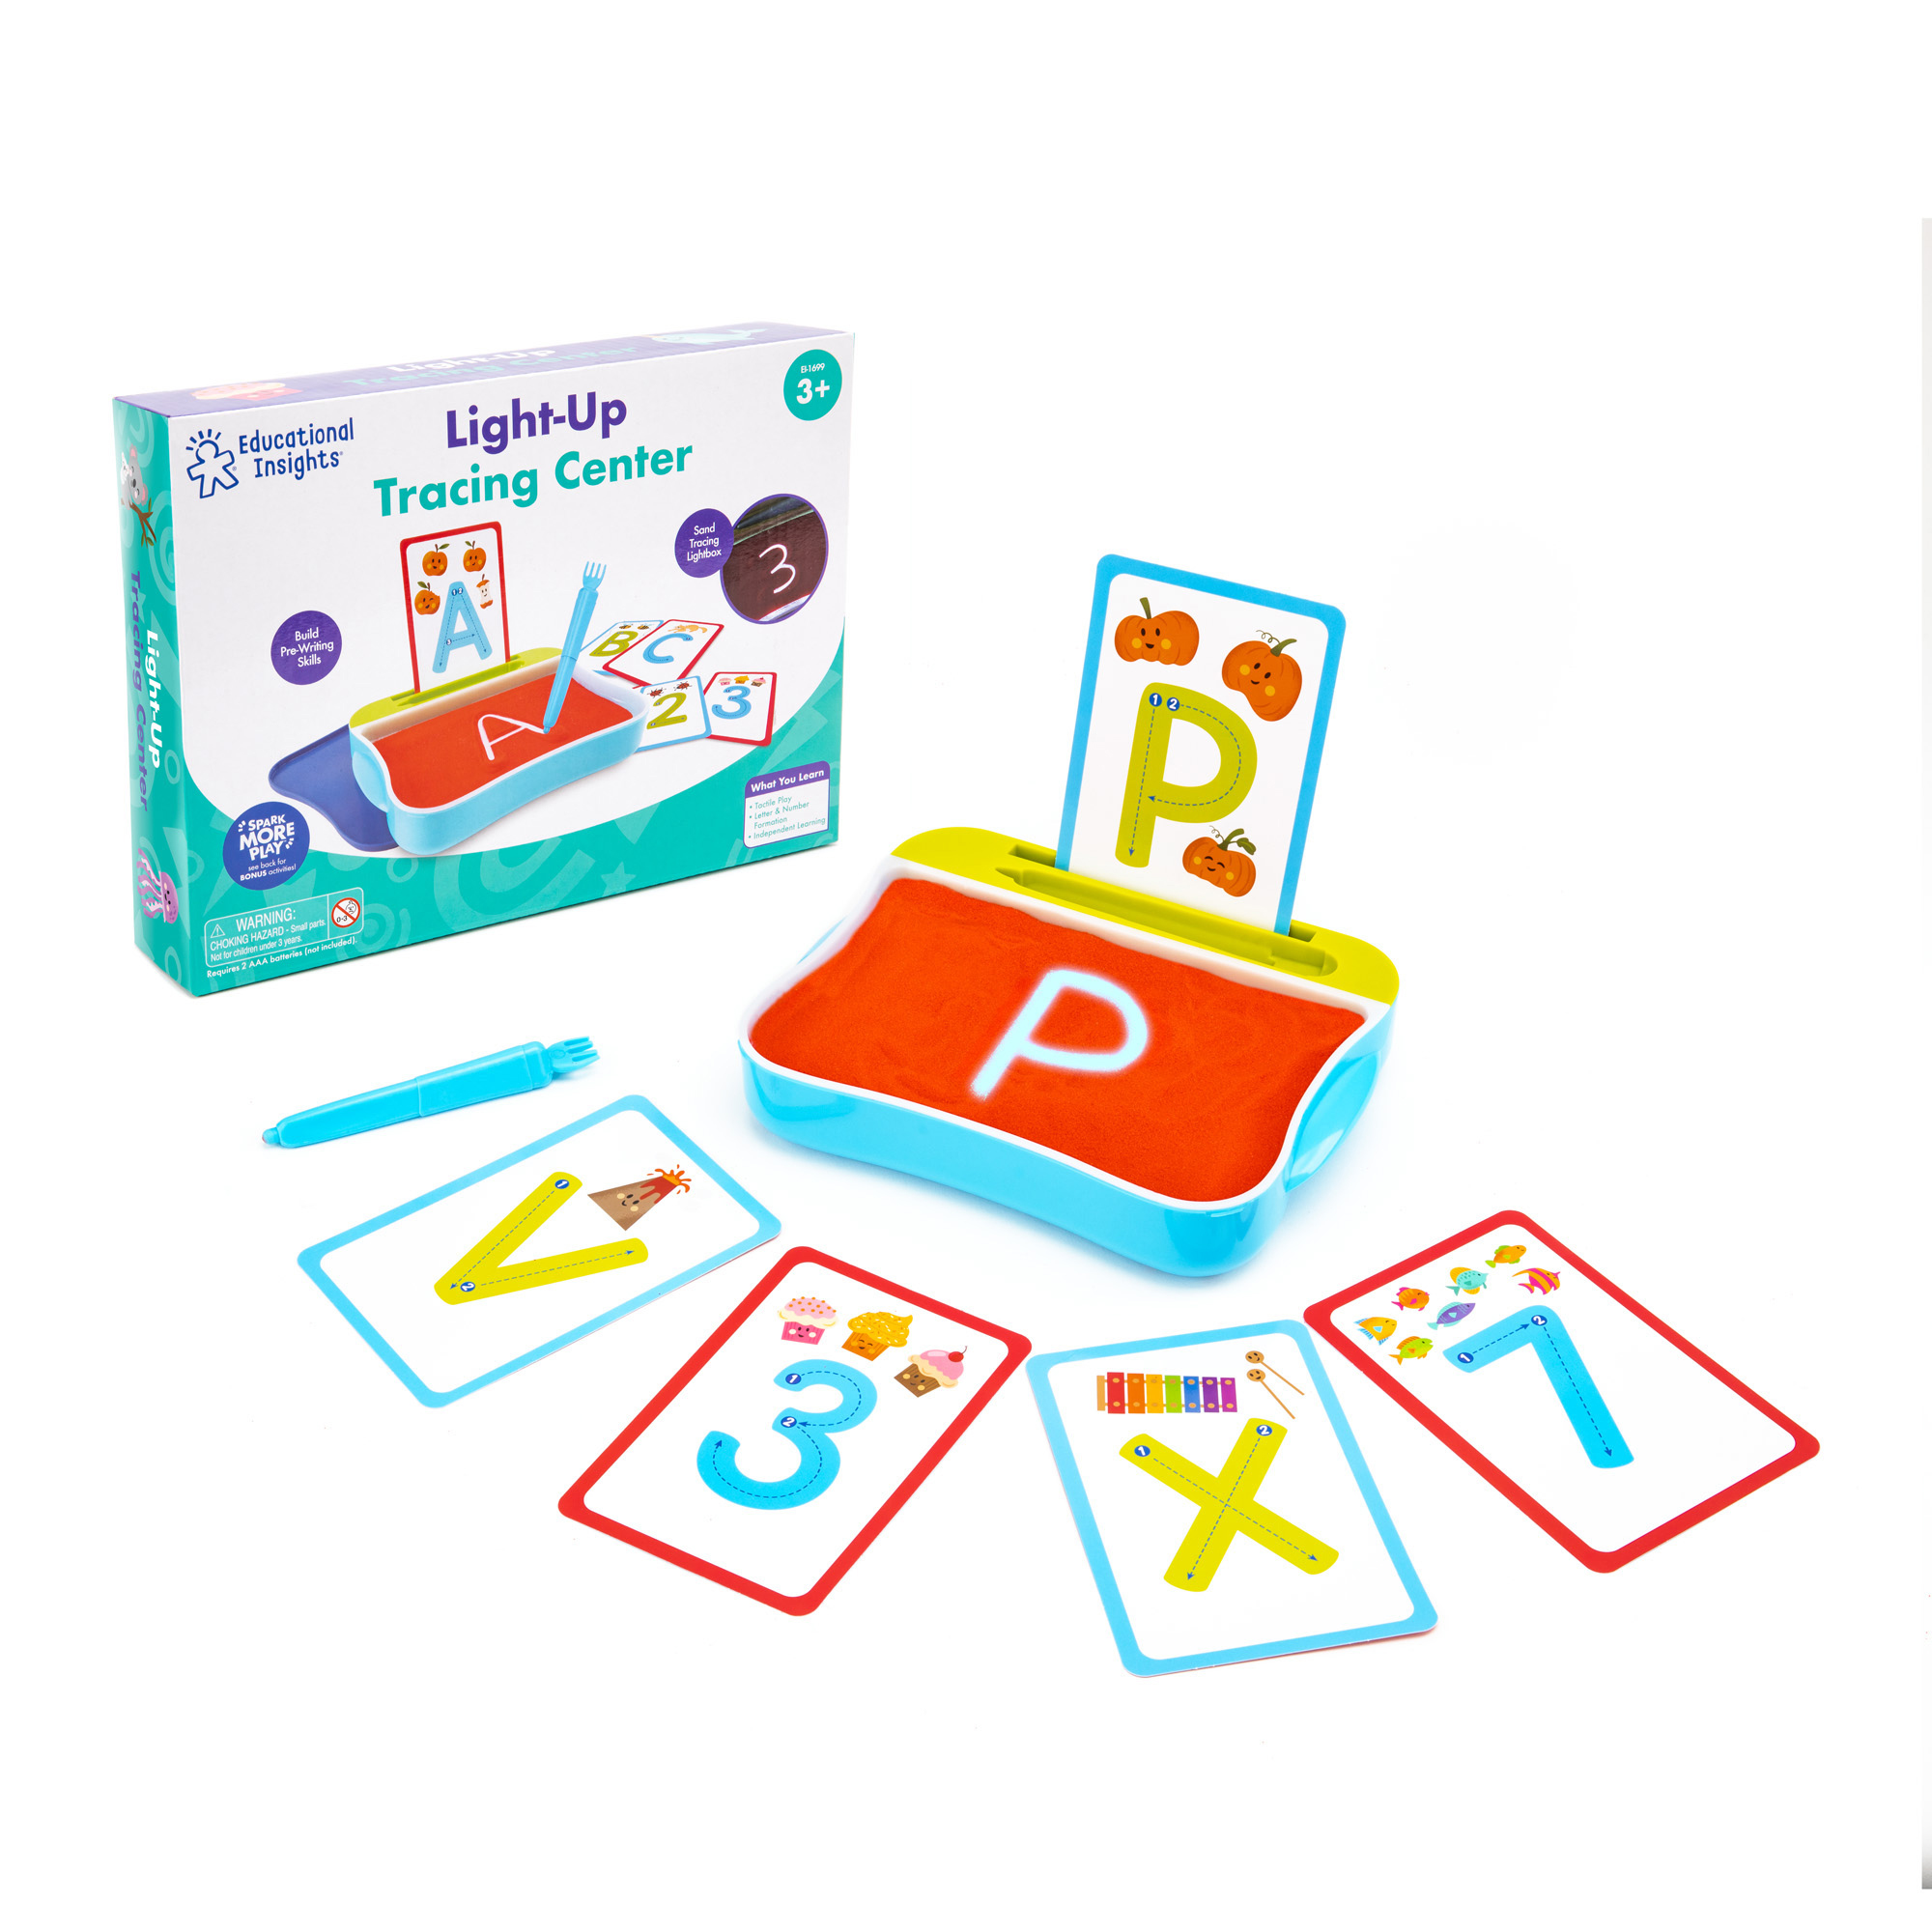 Educational Insights Light-Up Tracing Center